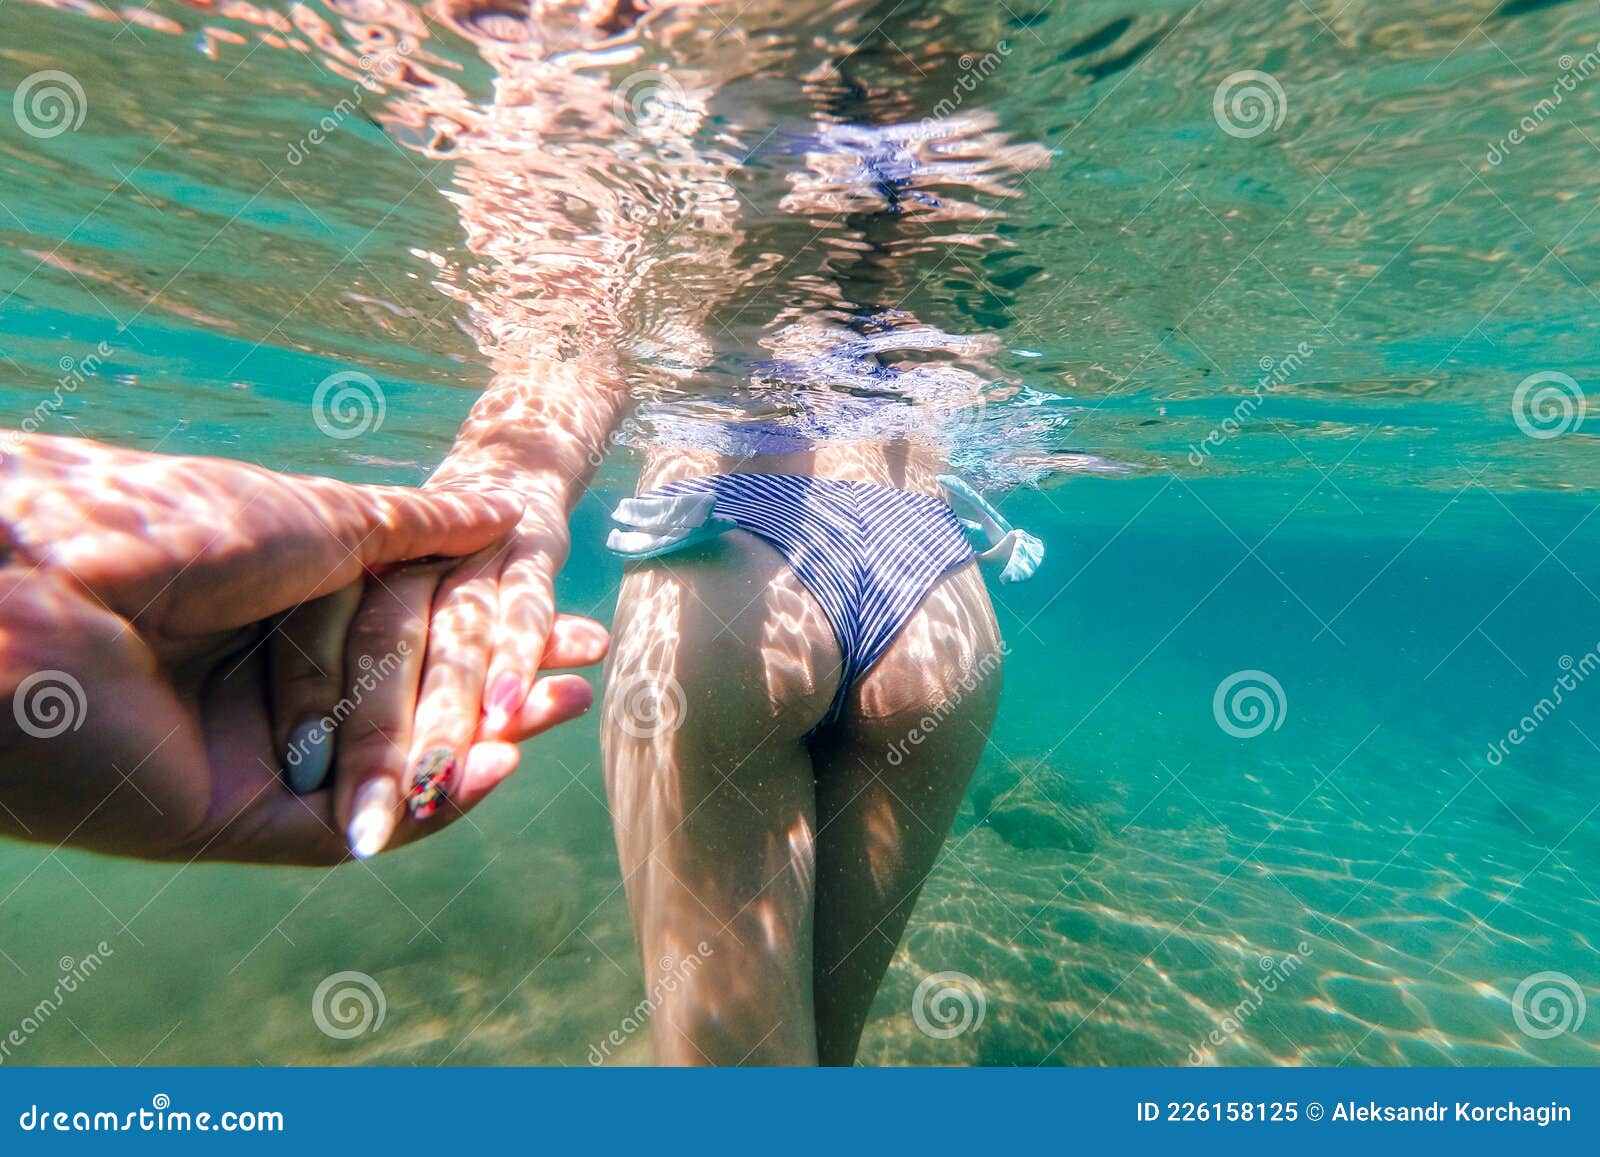 Of a Girl Under Water in Panties at Sea in Summer on Vacation. Follow Me  Stock Image - Image of tourism, back: 226158125